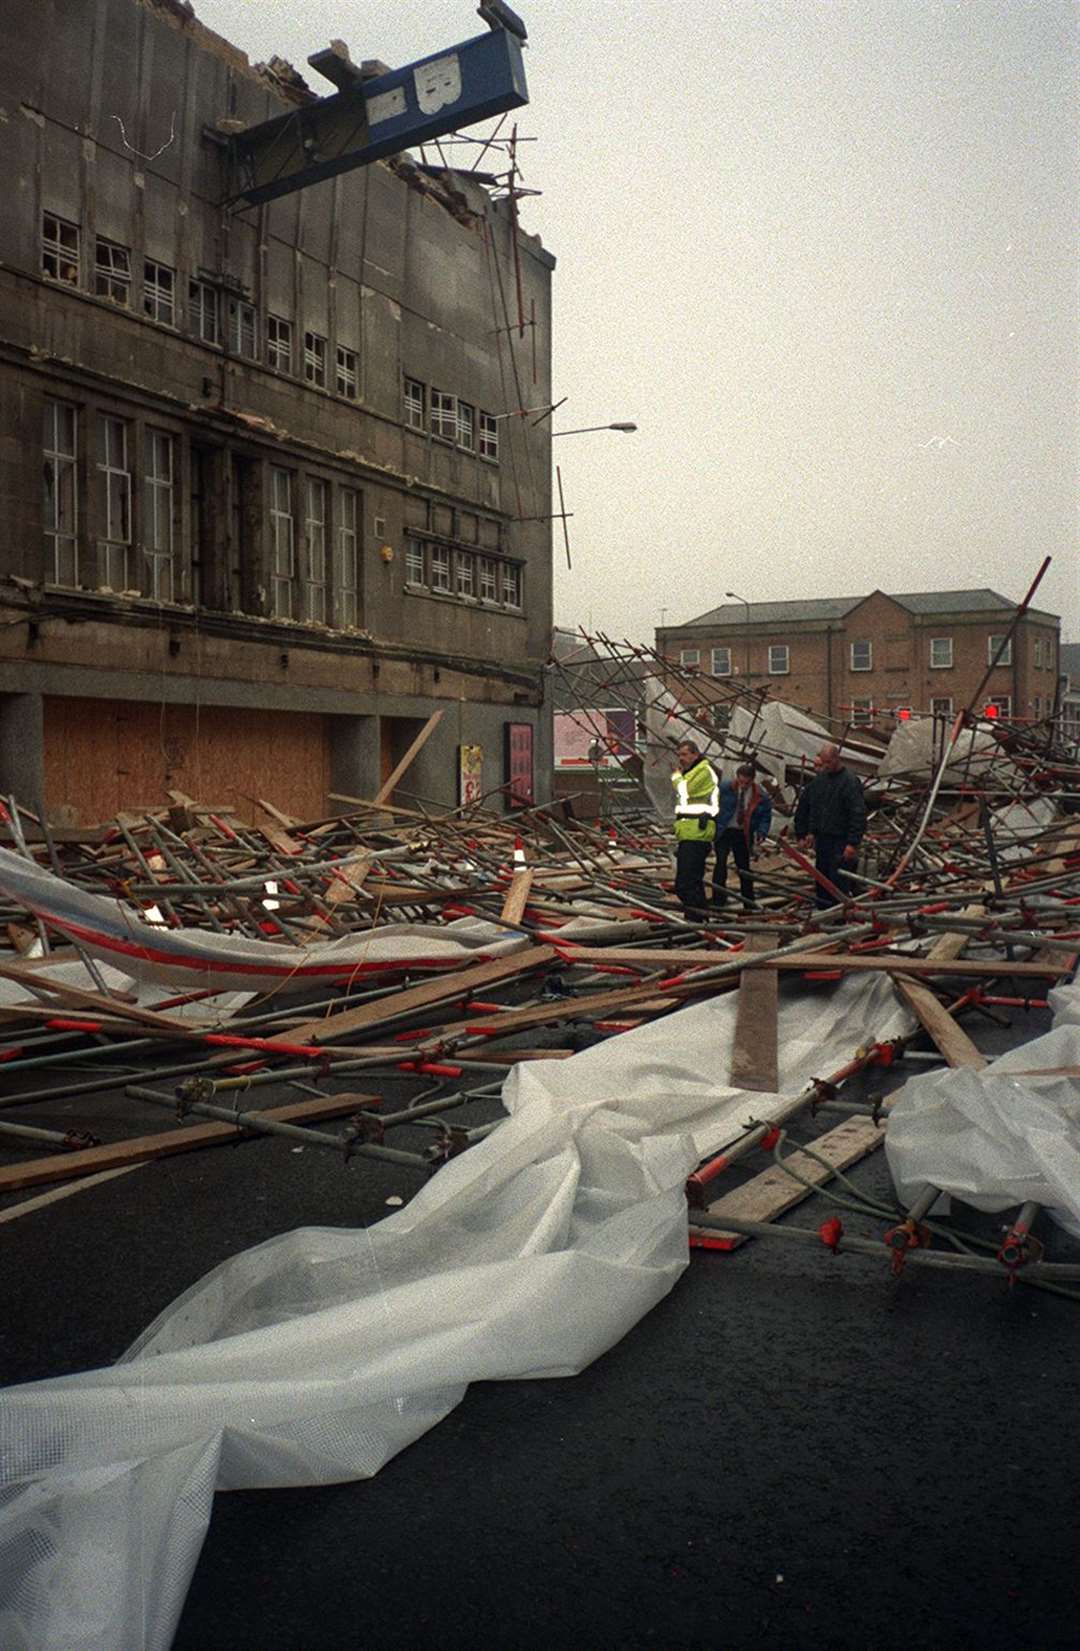 As if trial by fire wasn't enough for the old bingo hall, a massive scaffolding collapse finally consigned the historic building to demolition just two months after the fire in 1998